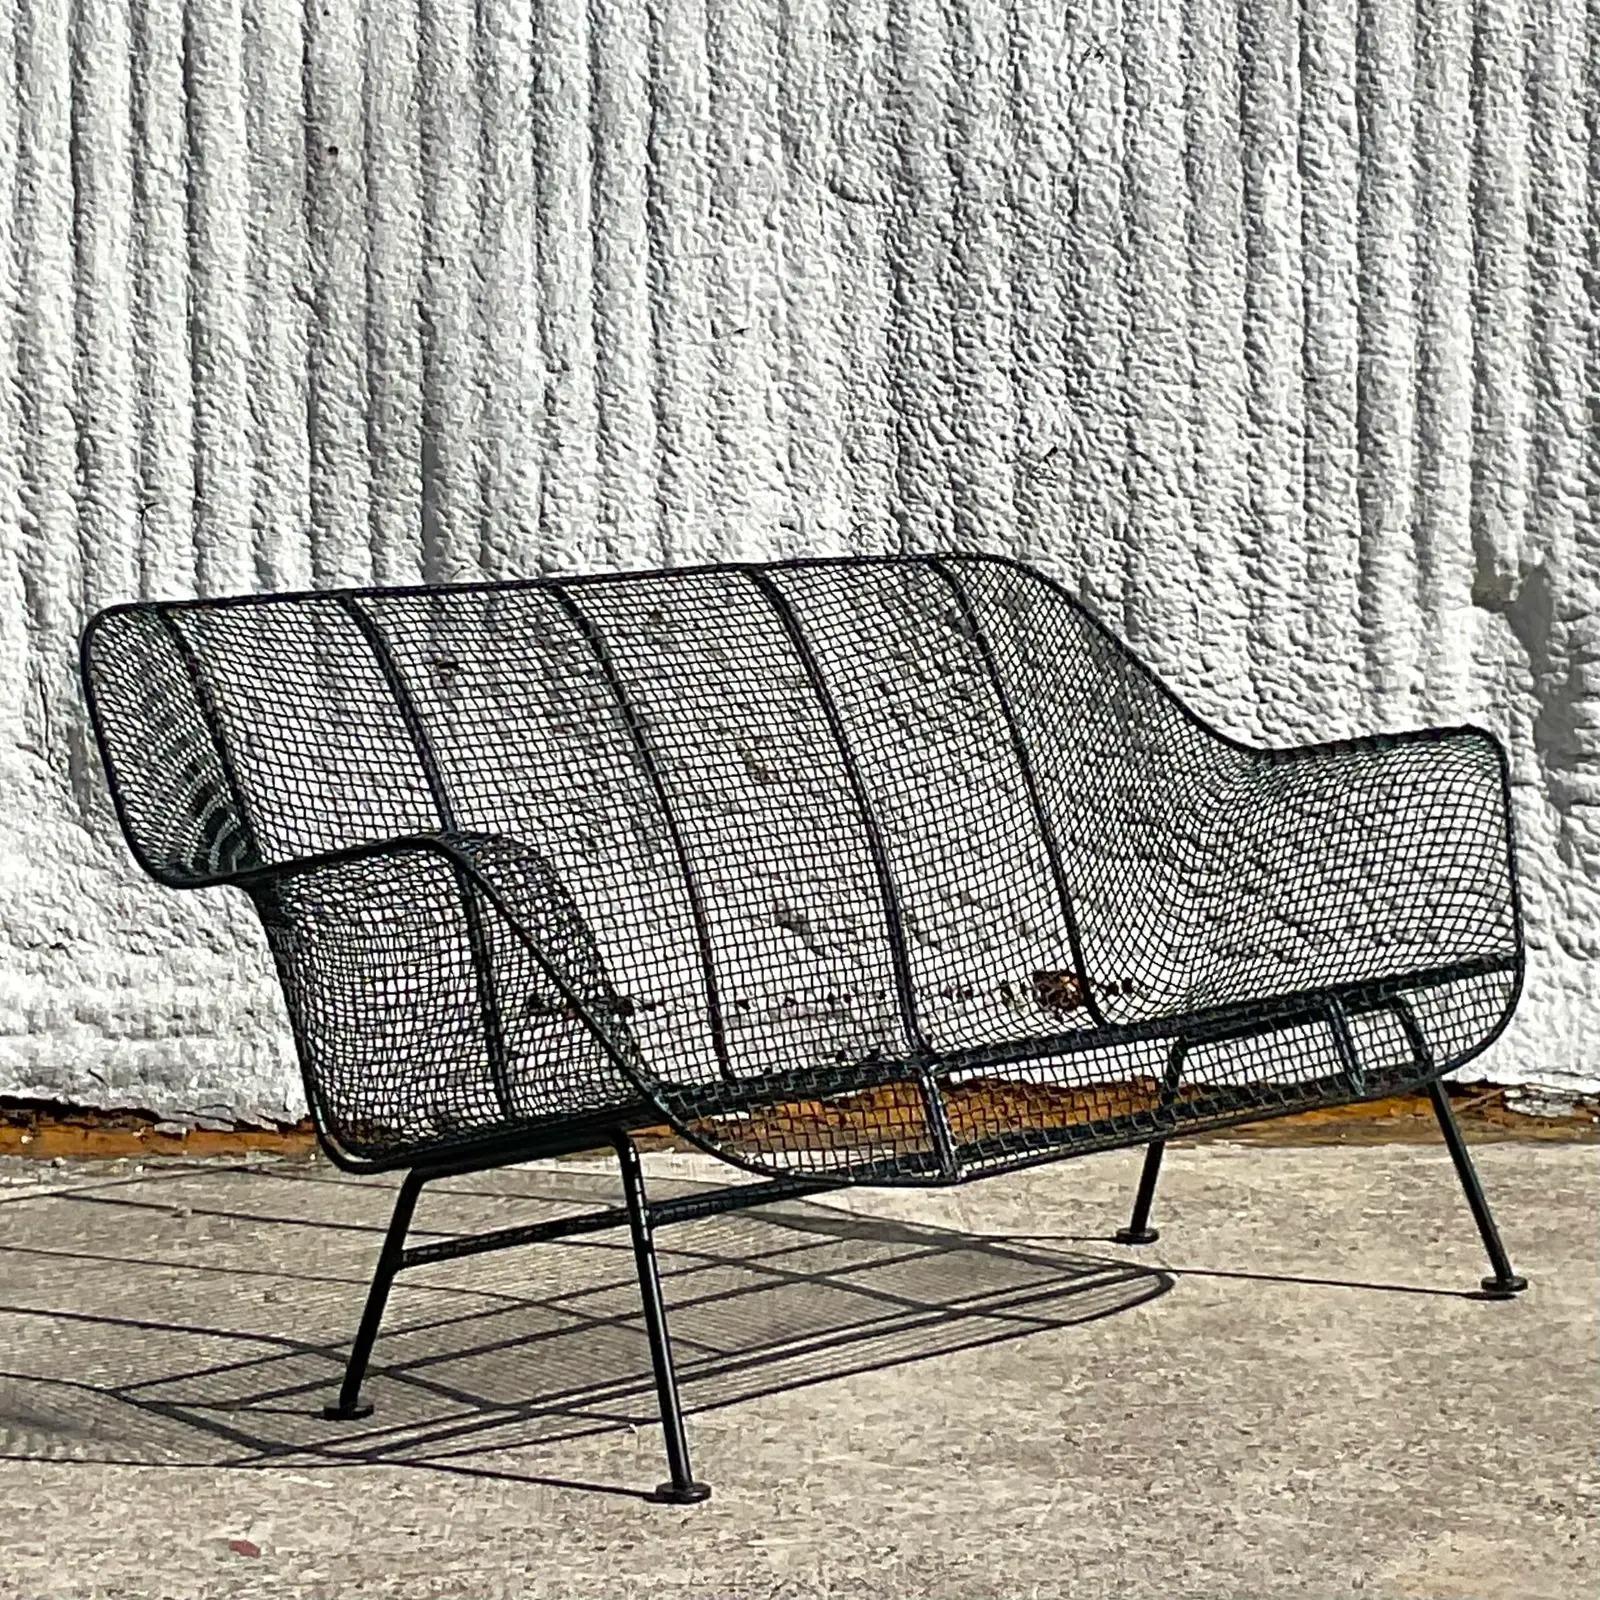 A fantastic vintage MCM wrought iron loveseat. Made by the iconic Russell Woodard group. Unmarked. Part of the coveted “Sculptura” collection. Fully restored with all new powder coating in matte black. Acquired from a Palm Beach estate.